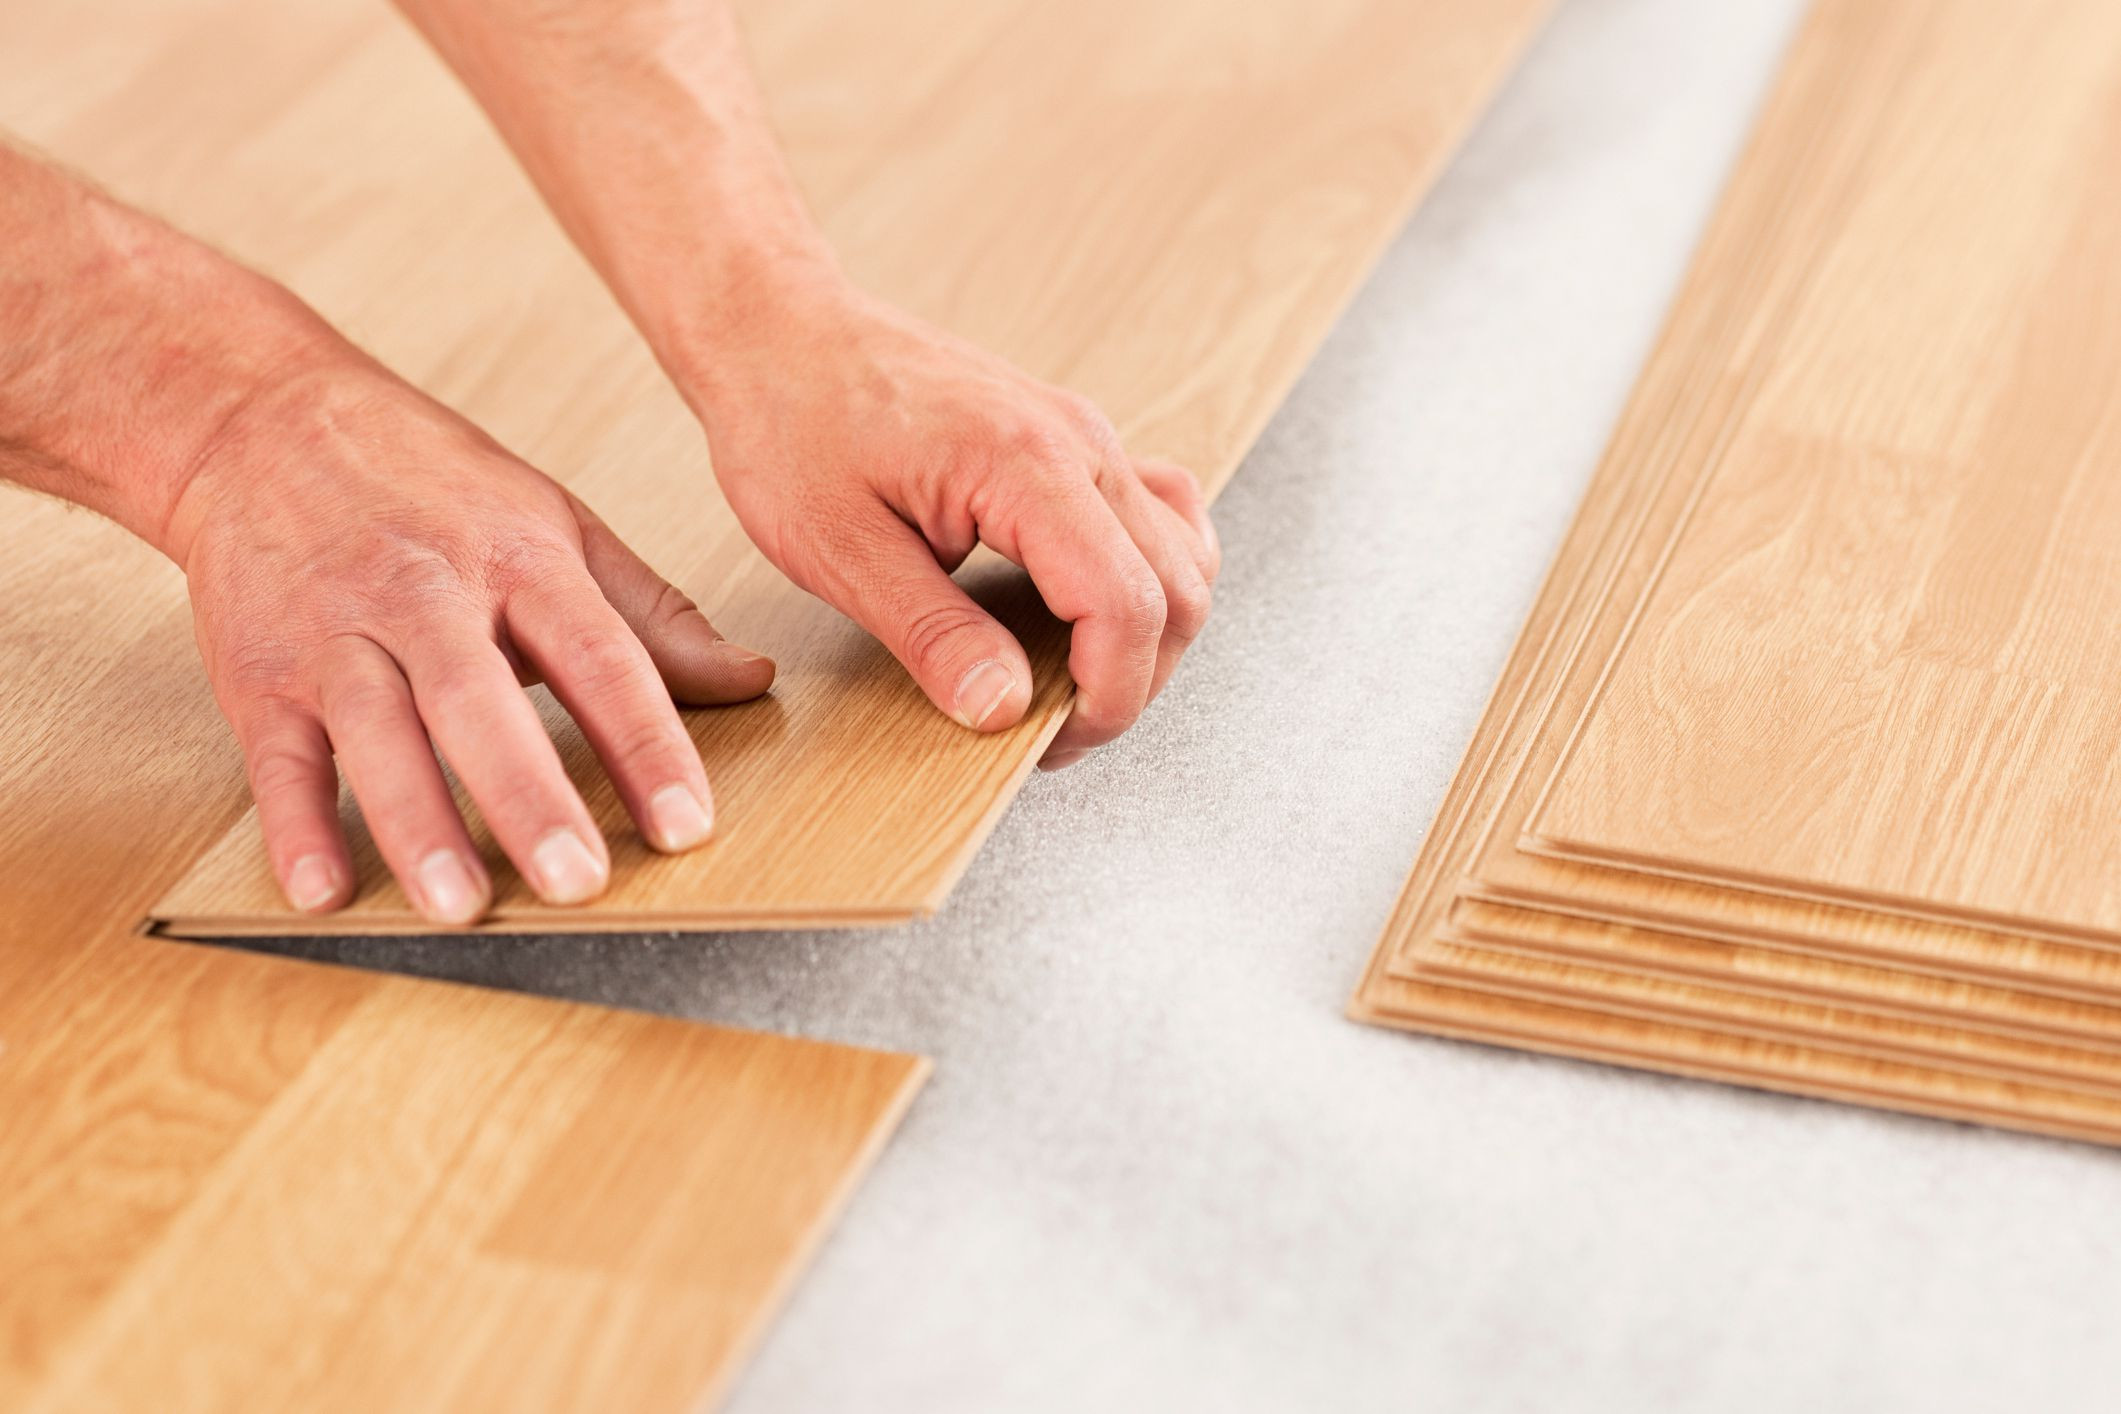 25 Fashionable How to Install Hardwood Floors On Cement 2024 free download how to install hardwood floors on cement of laminate underlayment pros and cons regarding laminate floor install gettyimages 154961561 588816495f9b58bdb3da1a02